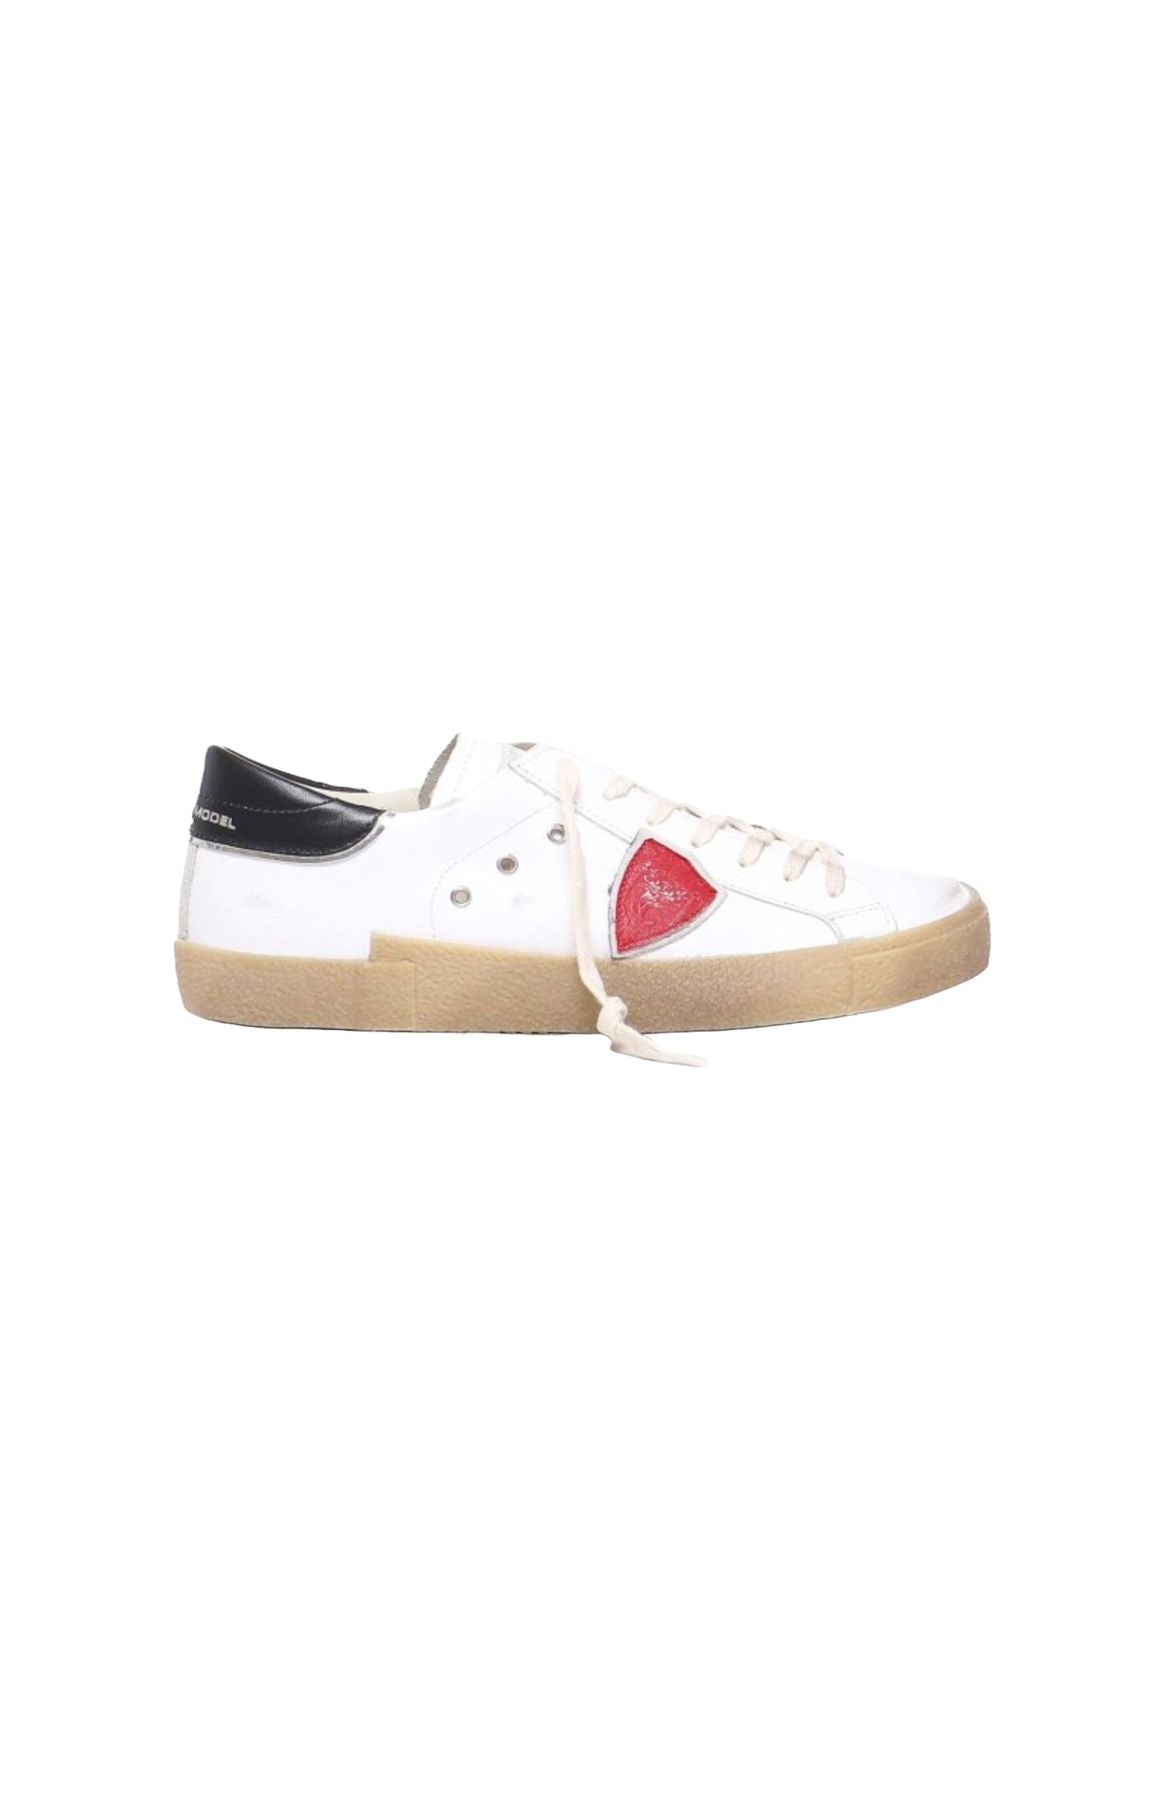 PRSX LOW WHT/RED - calzature - PHILIPPE MODEL